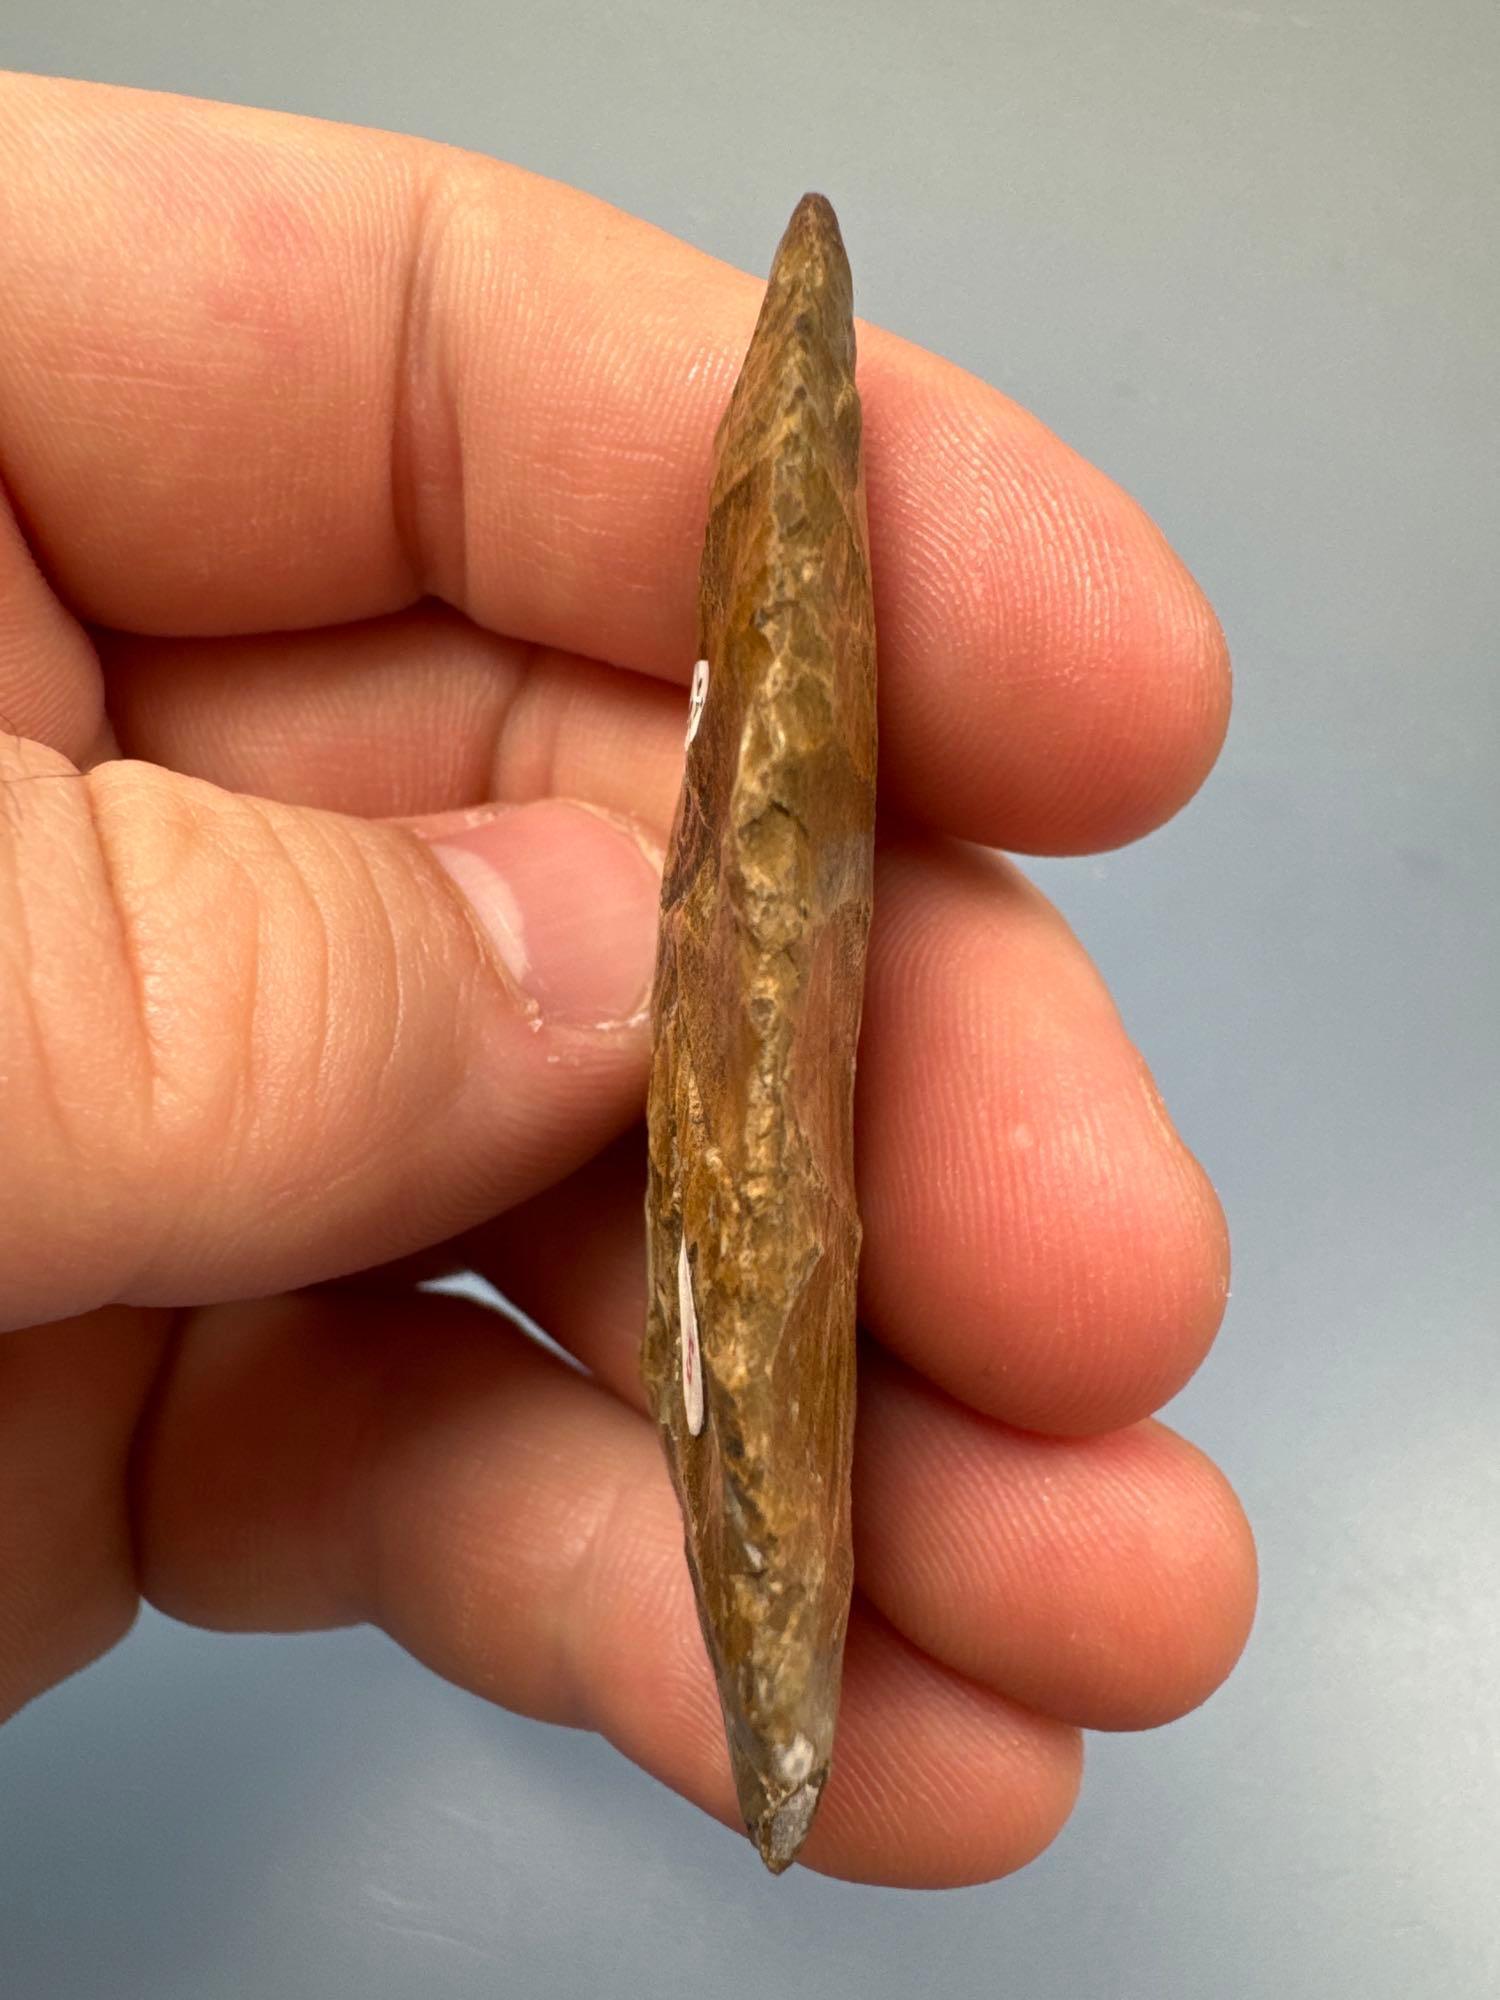 1 5/16" Serrated Jasper Point (likely Re-worked Bifurcate), Found in Pennsylvania, Ex: Bud Ripley Co